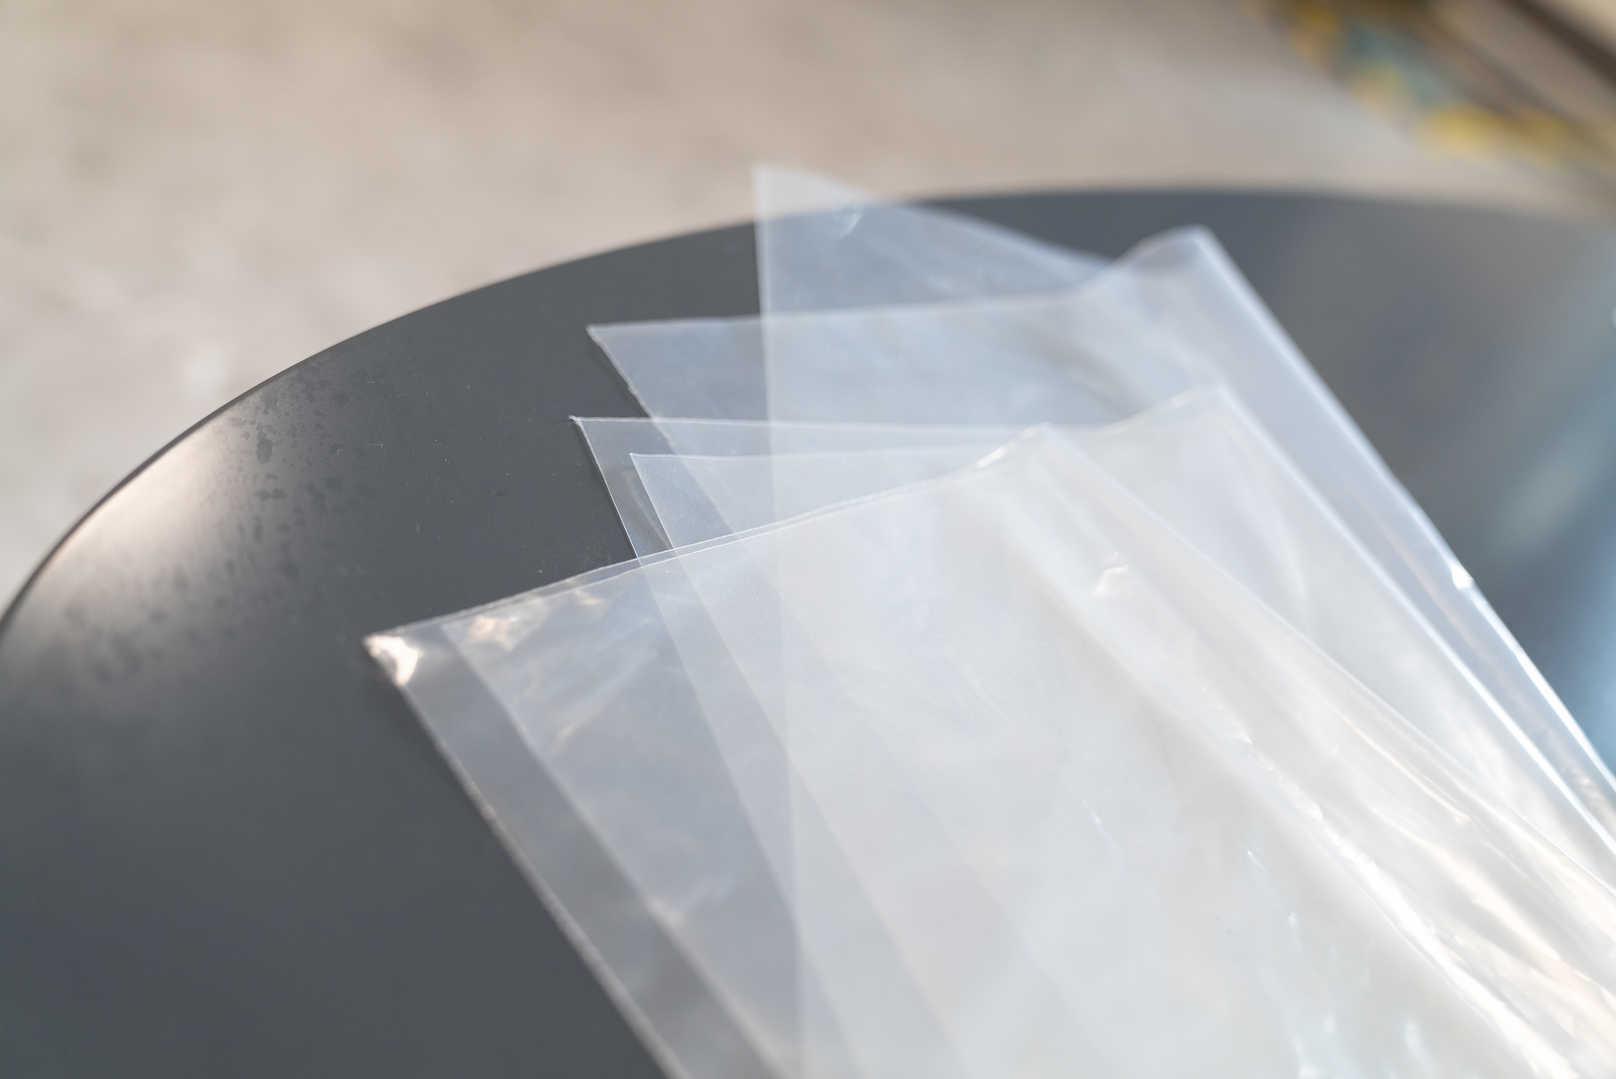 Biodegradable Plastic Bag Produced from Food Waste